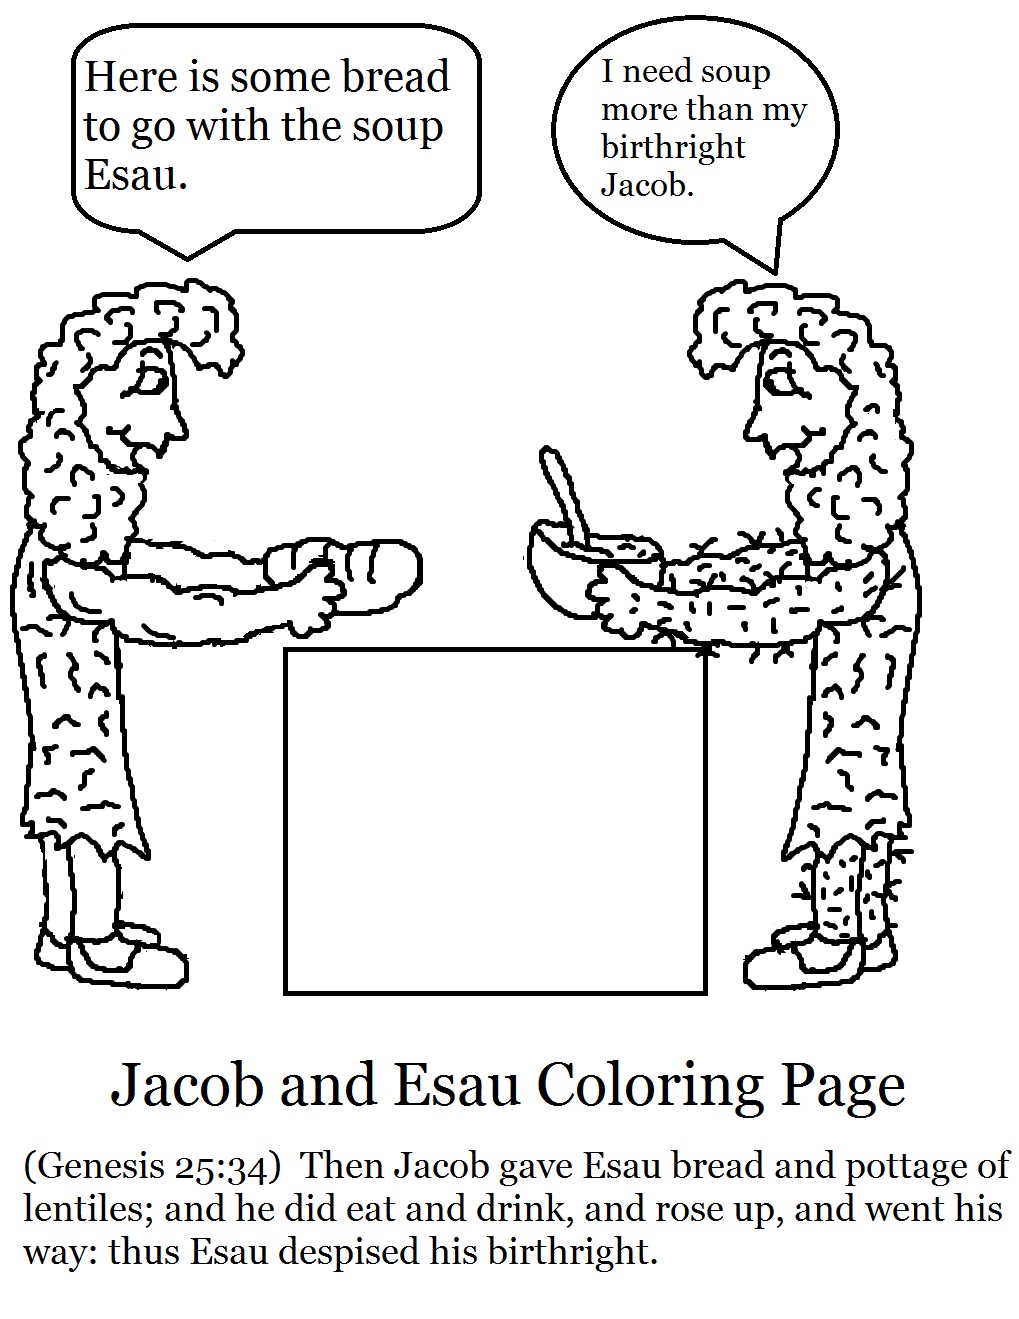 Colouring page of Jacob Esau and soup at